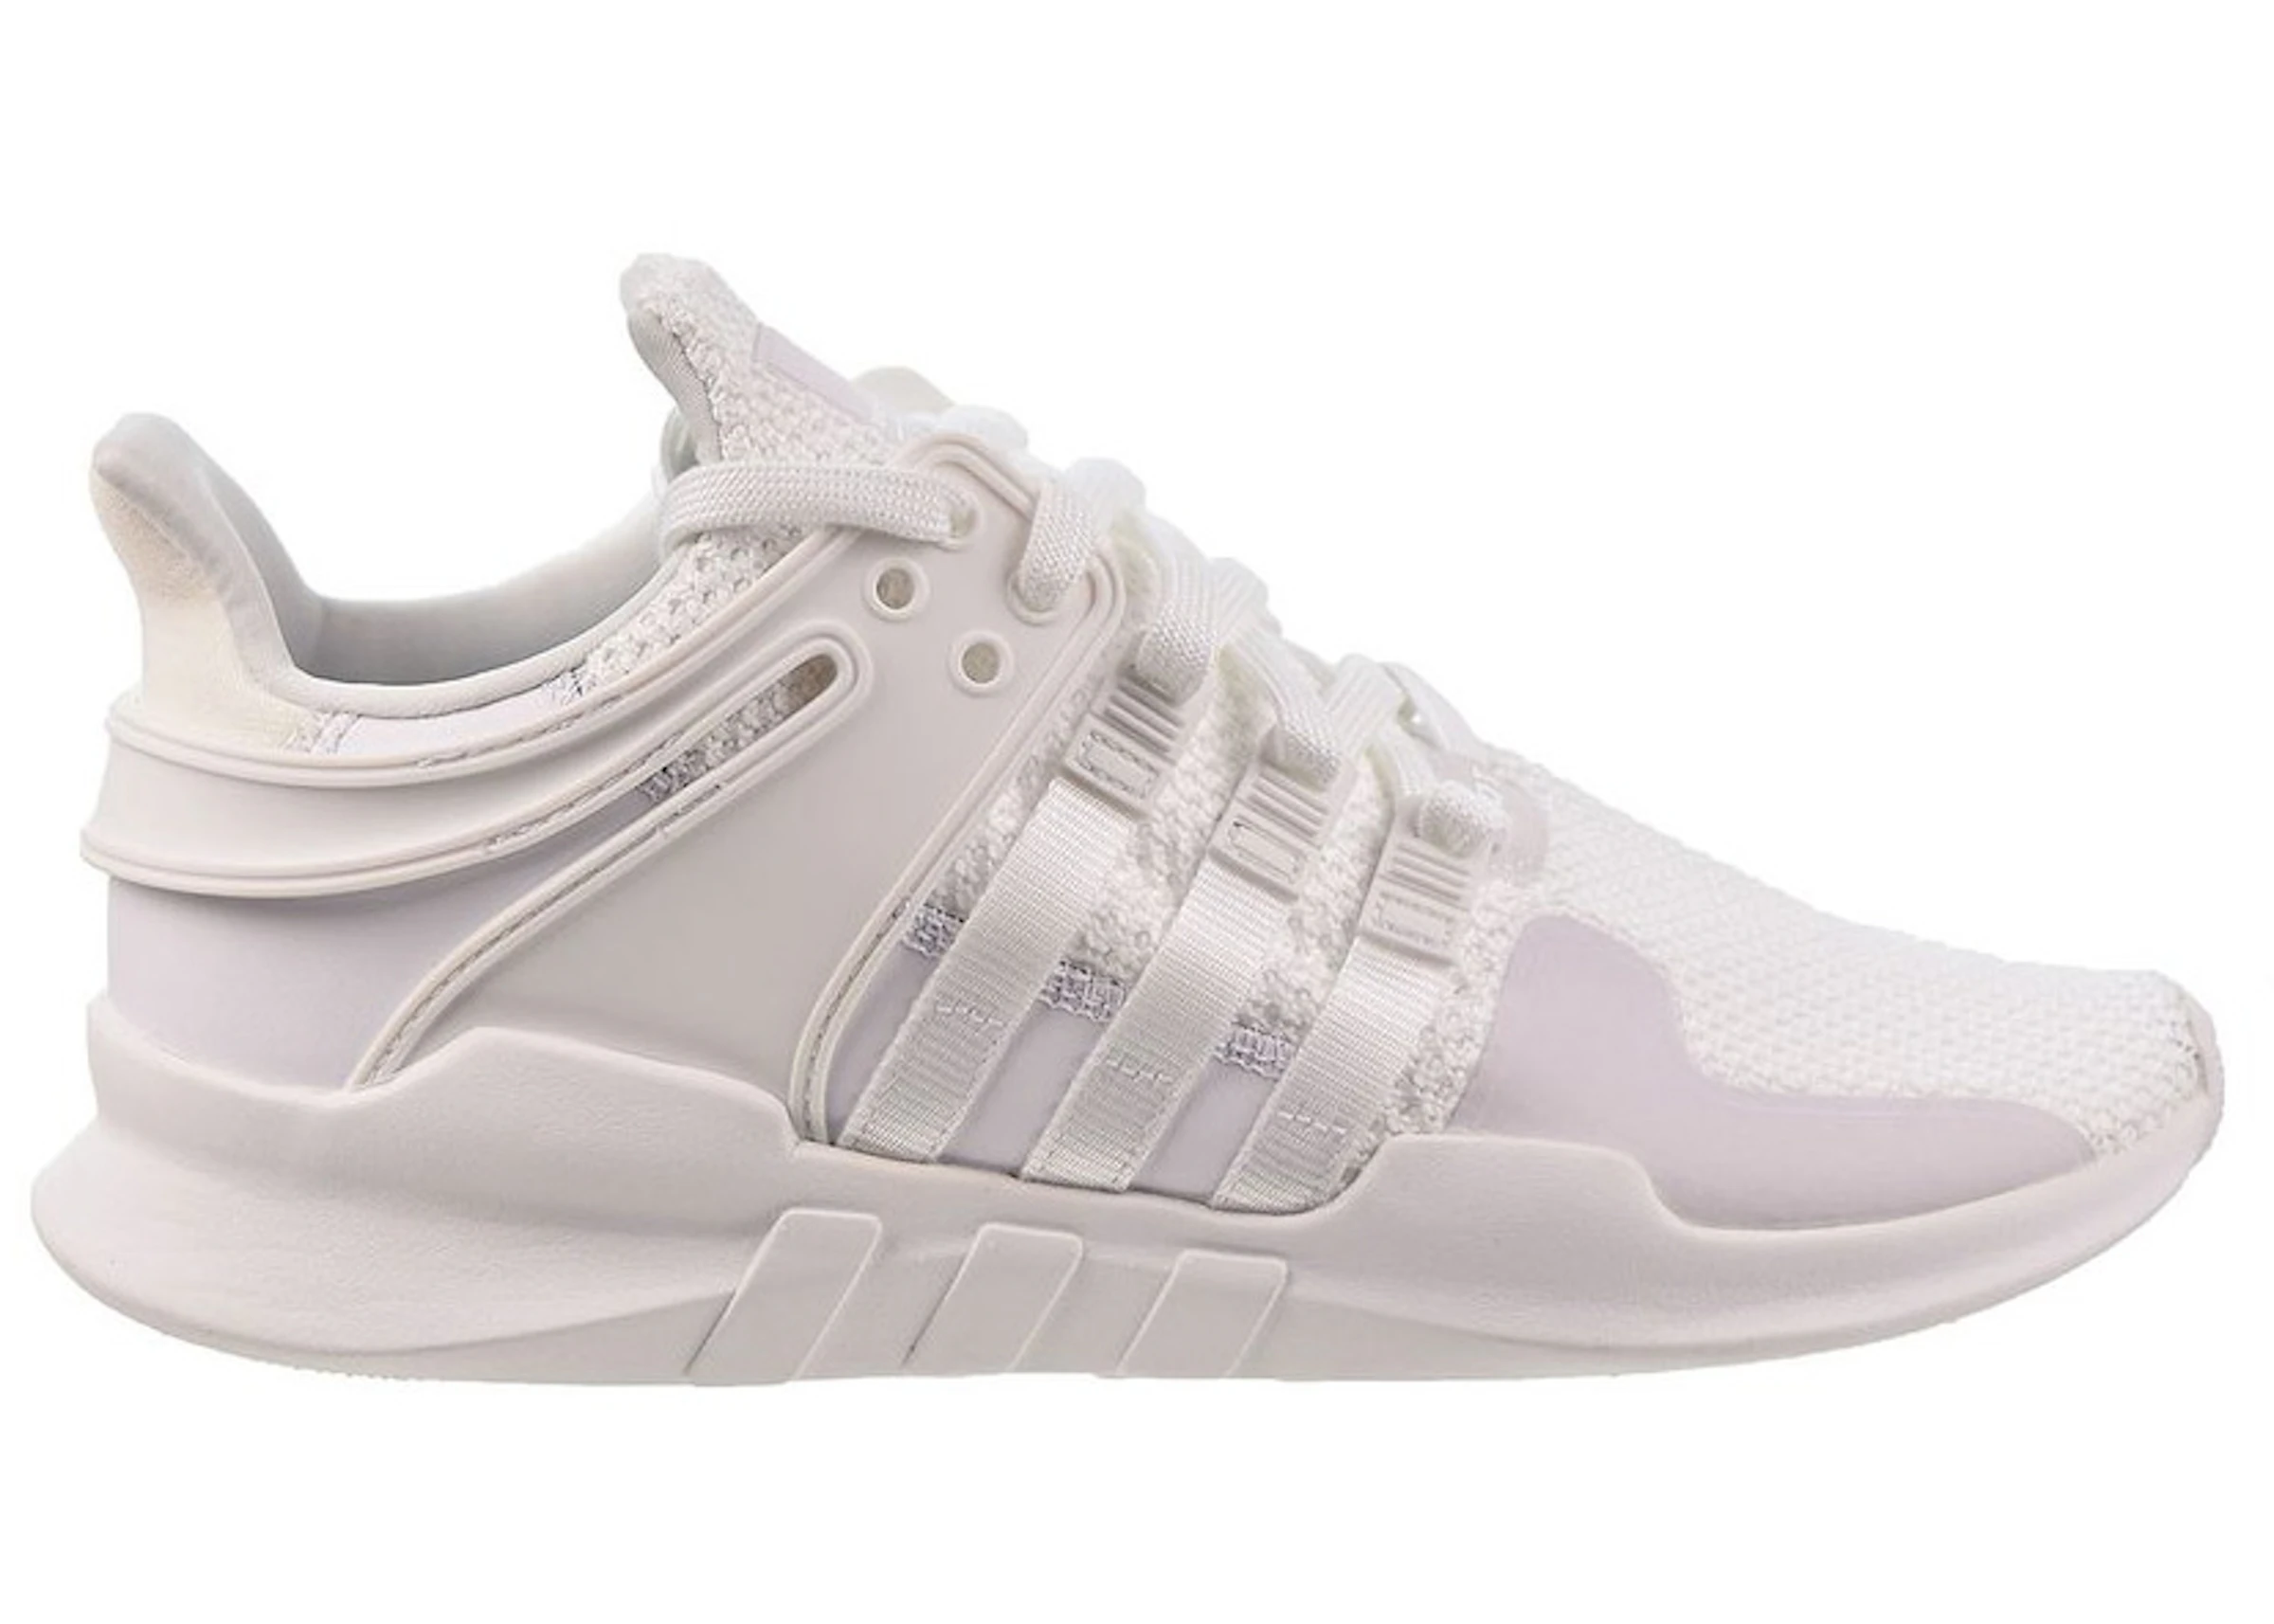 Appropriate Whirlpool Imprisonment adidas EQT Support ADV Footwear White - D96770 - US